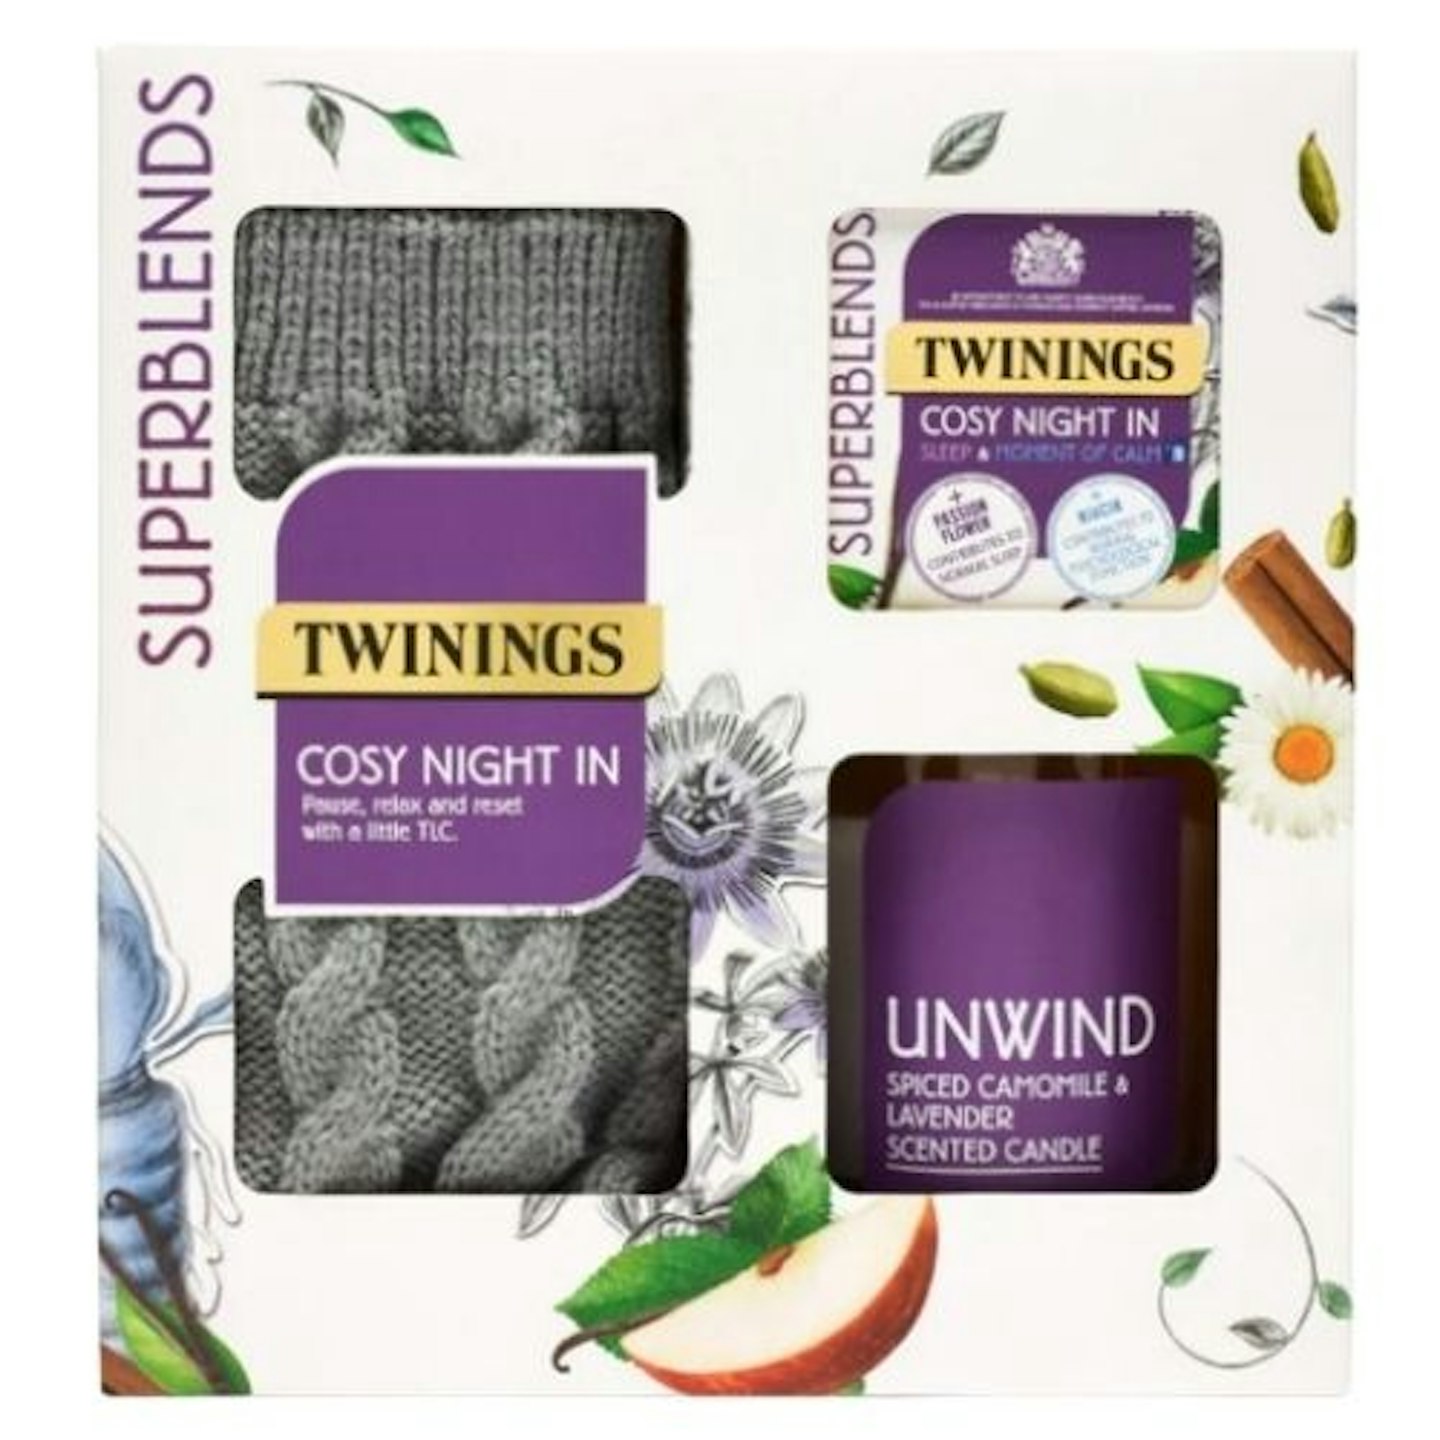 Twinnings Superblends Cosy Night In Gift Set